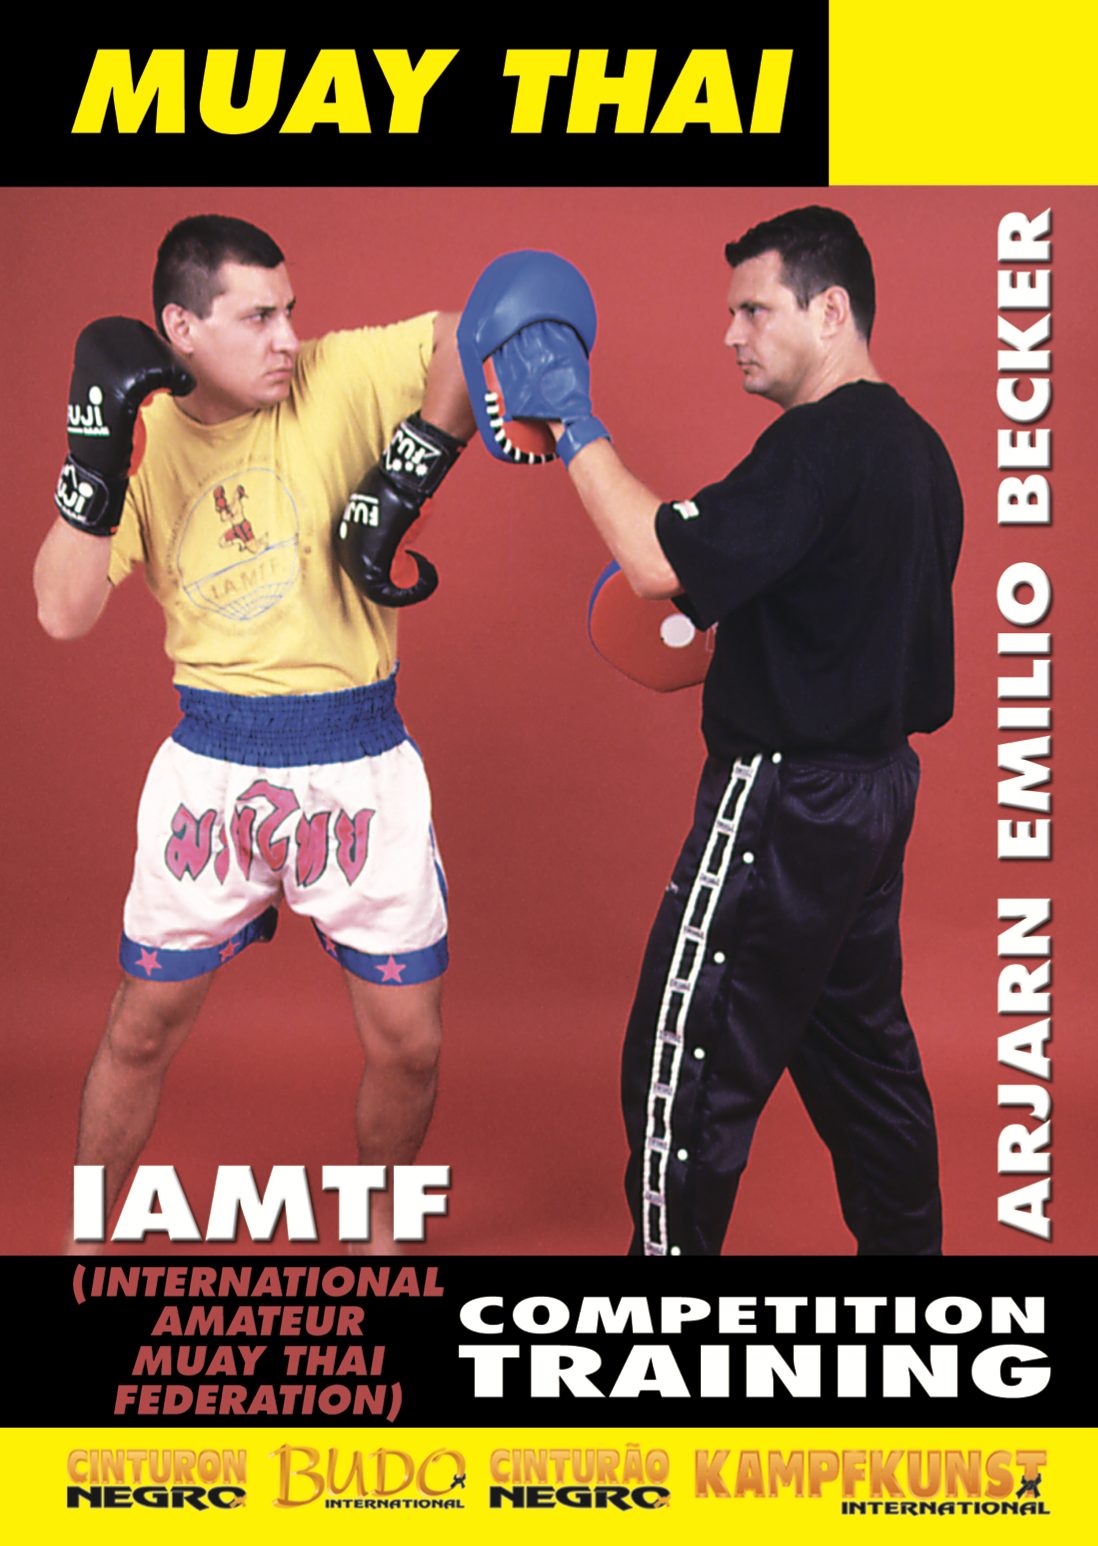 Muay Thai Competition Training DVD by Emilio Becker - Budovideos